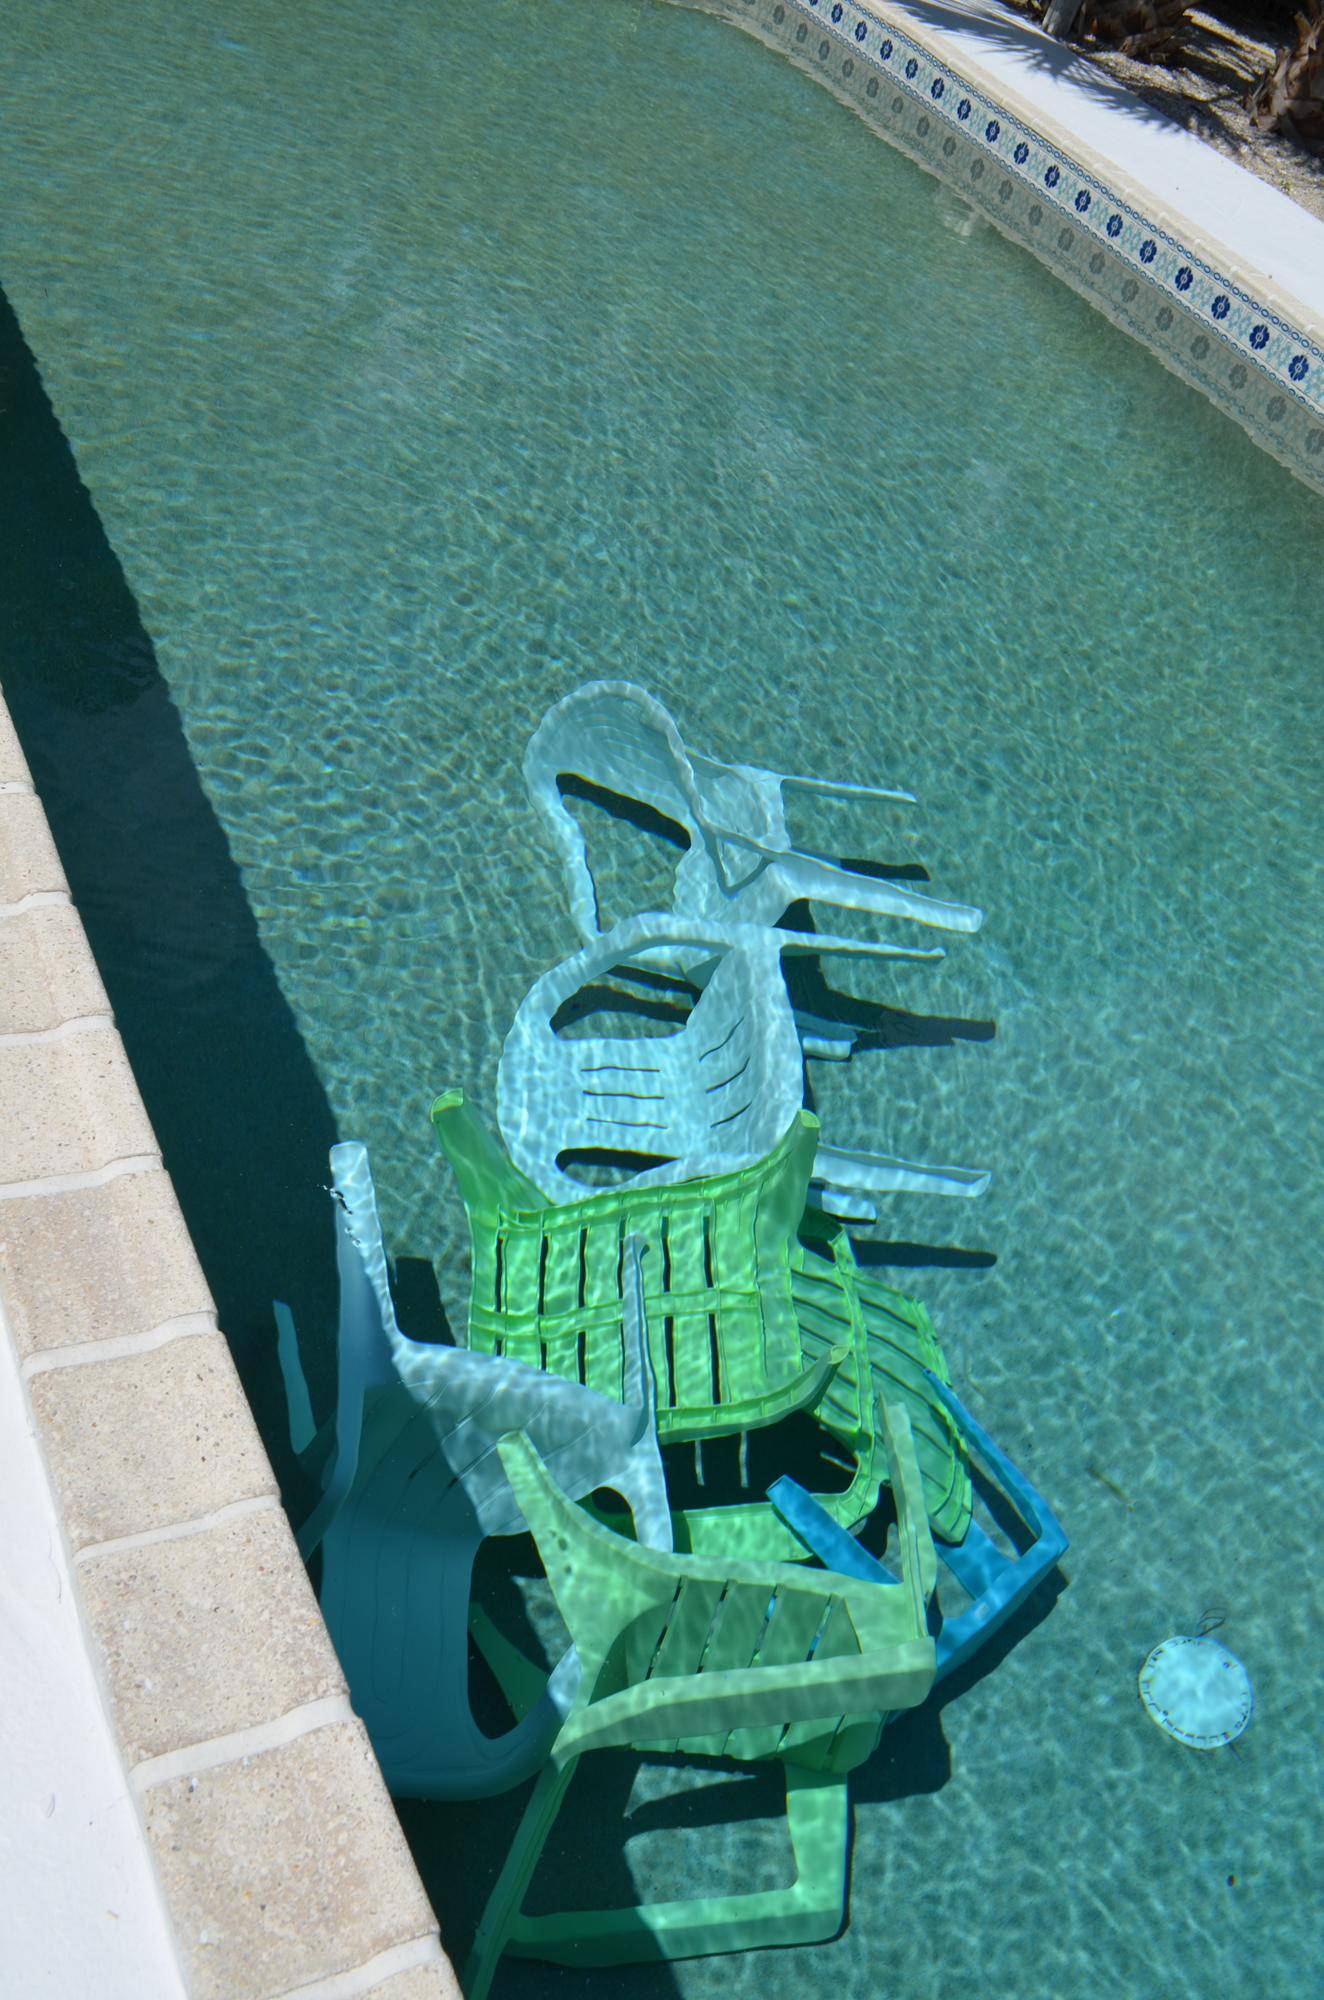 Zanne Gordon stores her plastic lawn furniture at the bottom of her pool in preparation for the storm.